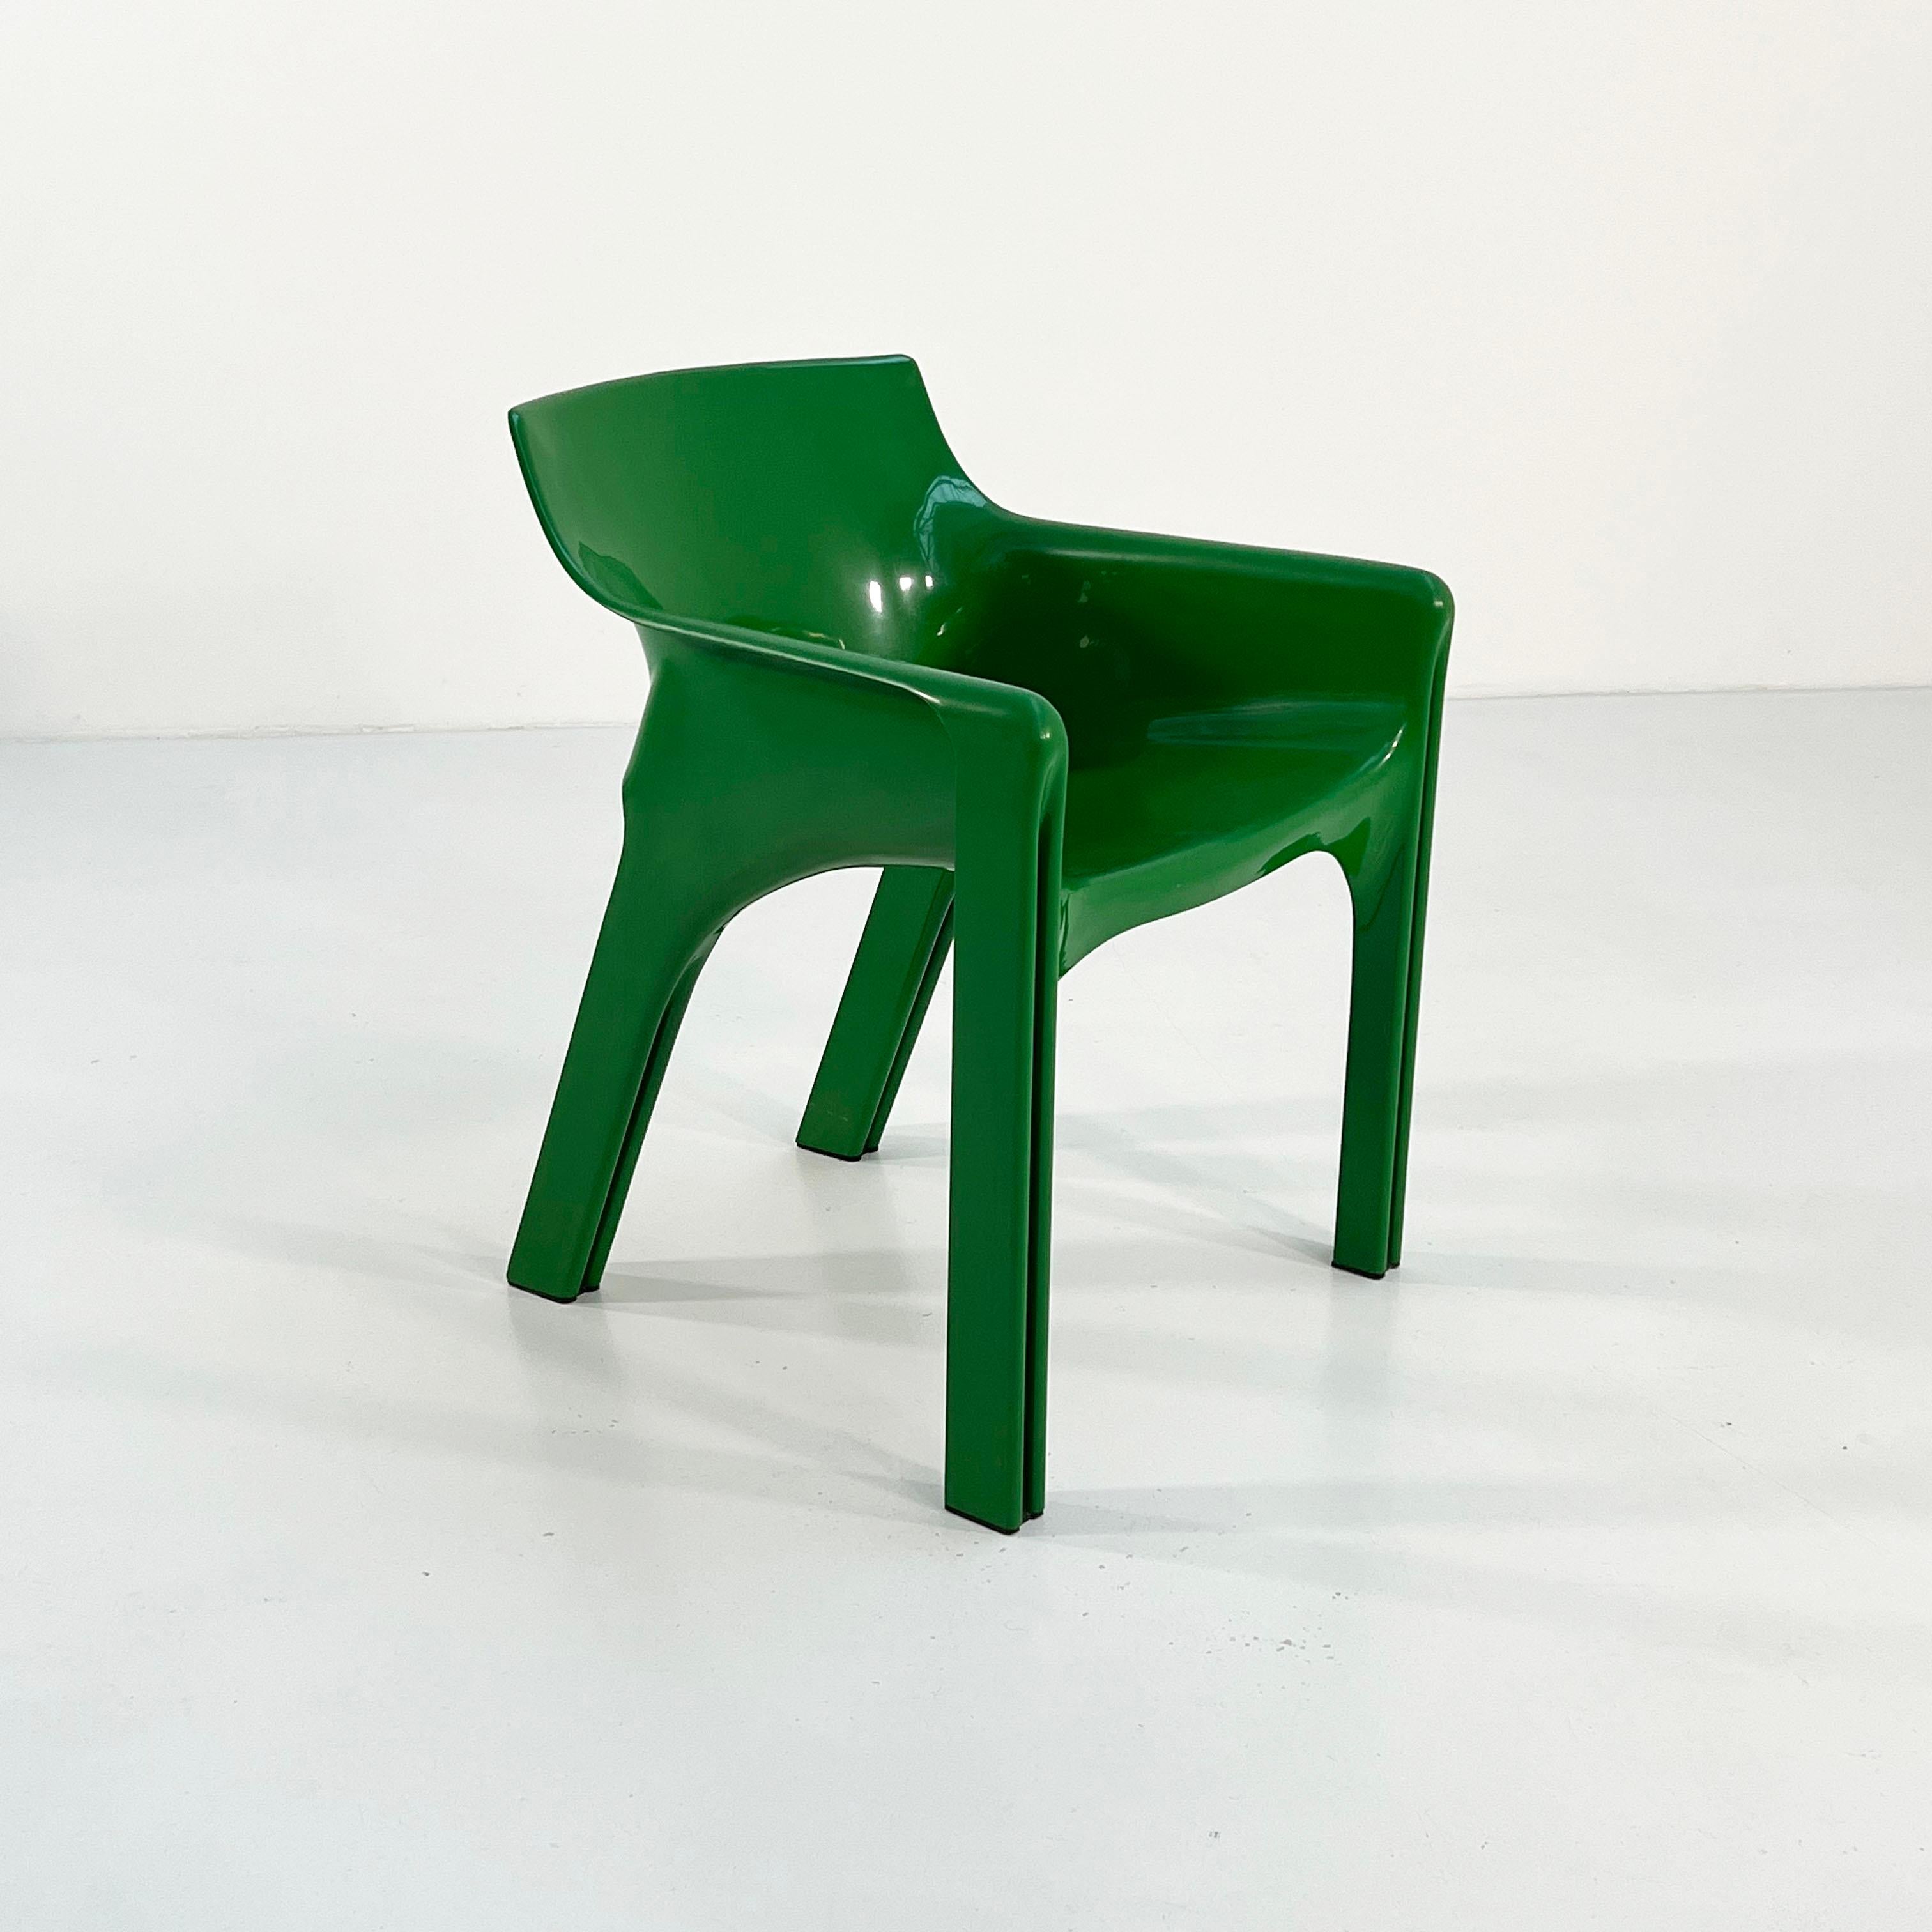 Designer - Vico Magistretti
Producer - Artemide
Model - Gaudi Armchairs
Design Period - Seventies
Measurements - Width 62 cm x Depth 55 cm x Height 74 cm x Seat Height 46 cm
Materials - Plastic
Color - Green
Light wear consistent with age and use.